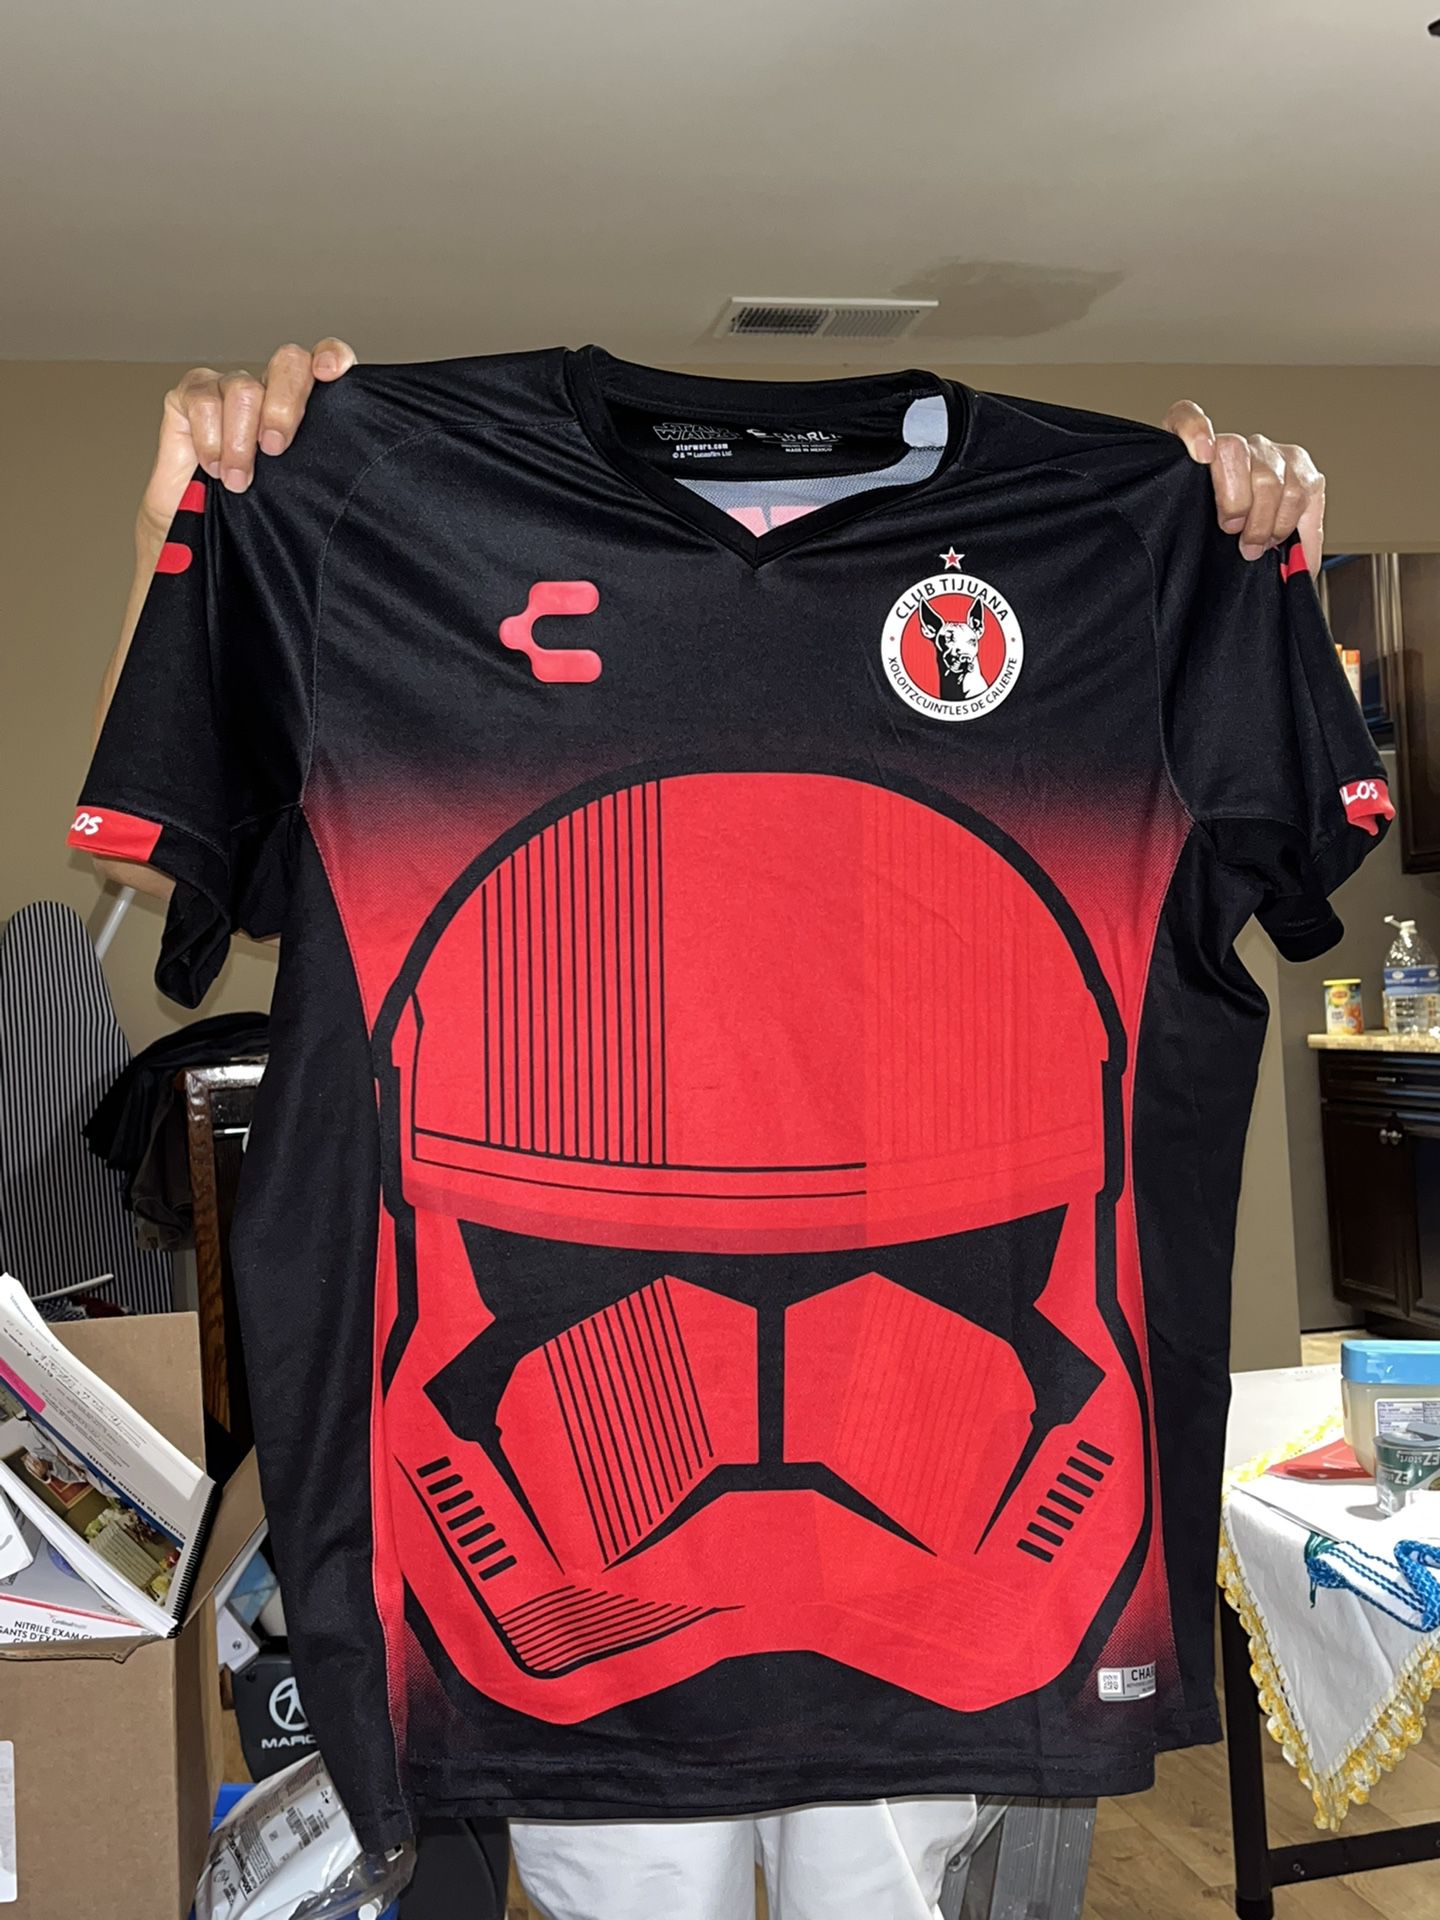 Xolos De Tijuana Jersey Star Wars Edition In Good Condition Size Is Xl for  Sale in Orange, CA - OfferUp